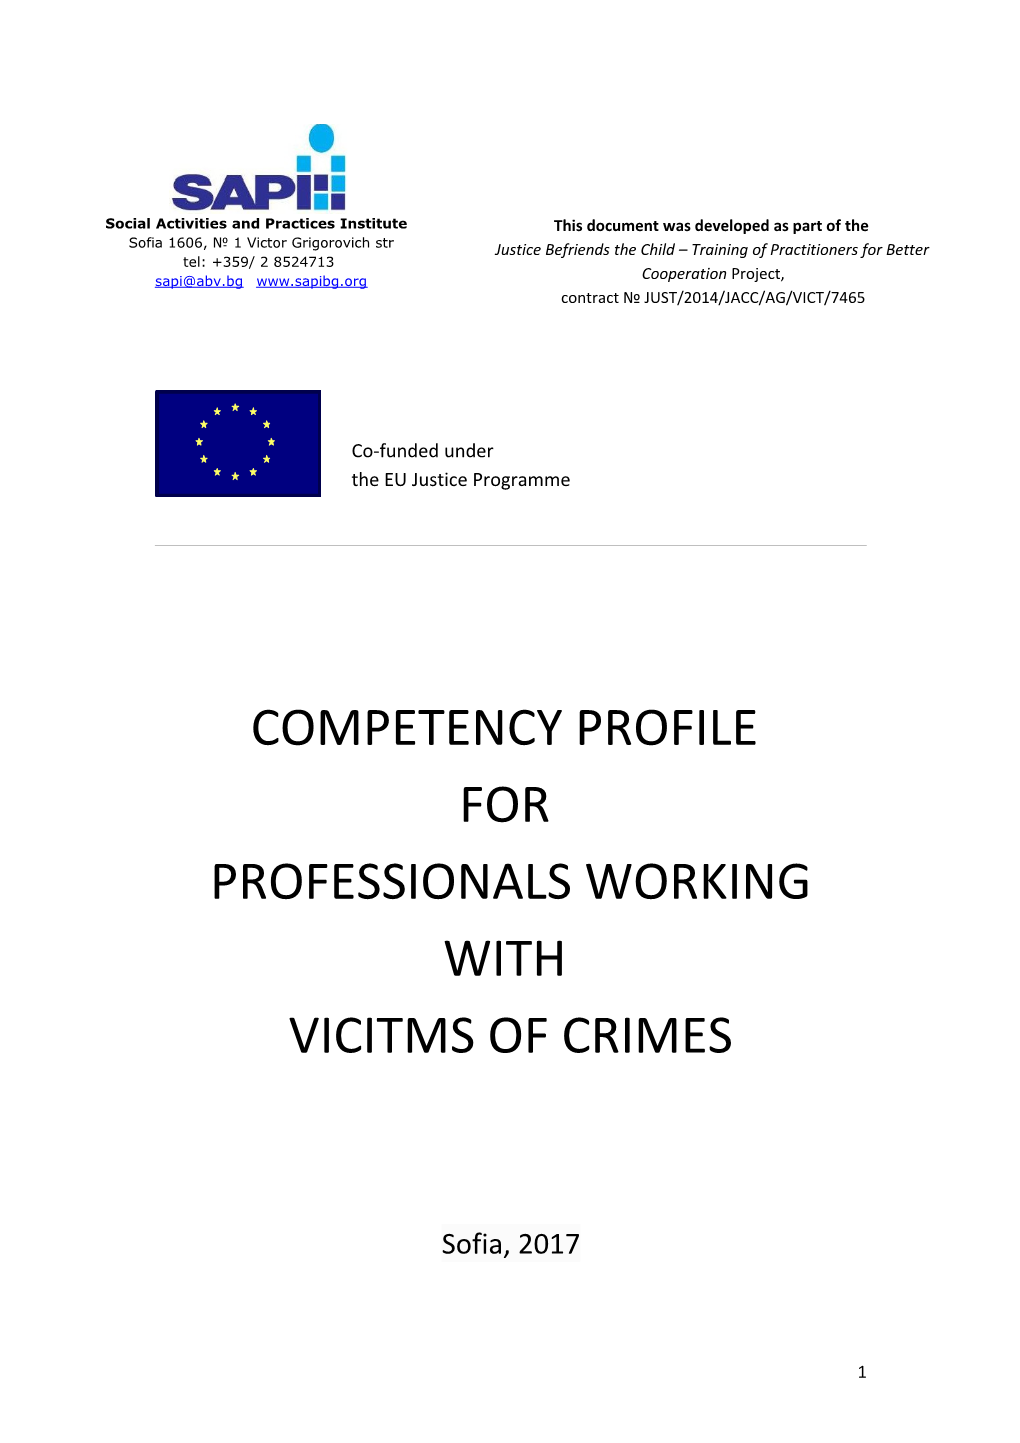 Competency Profile